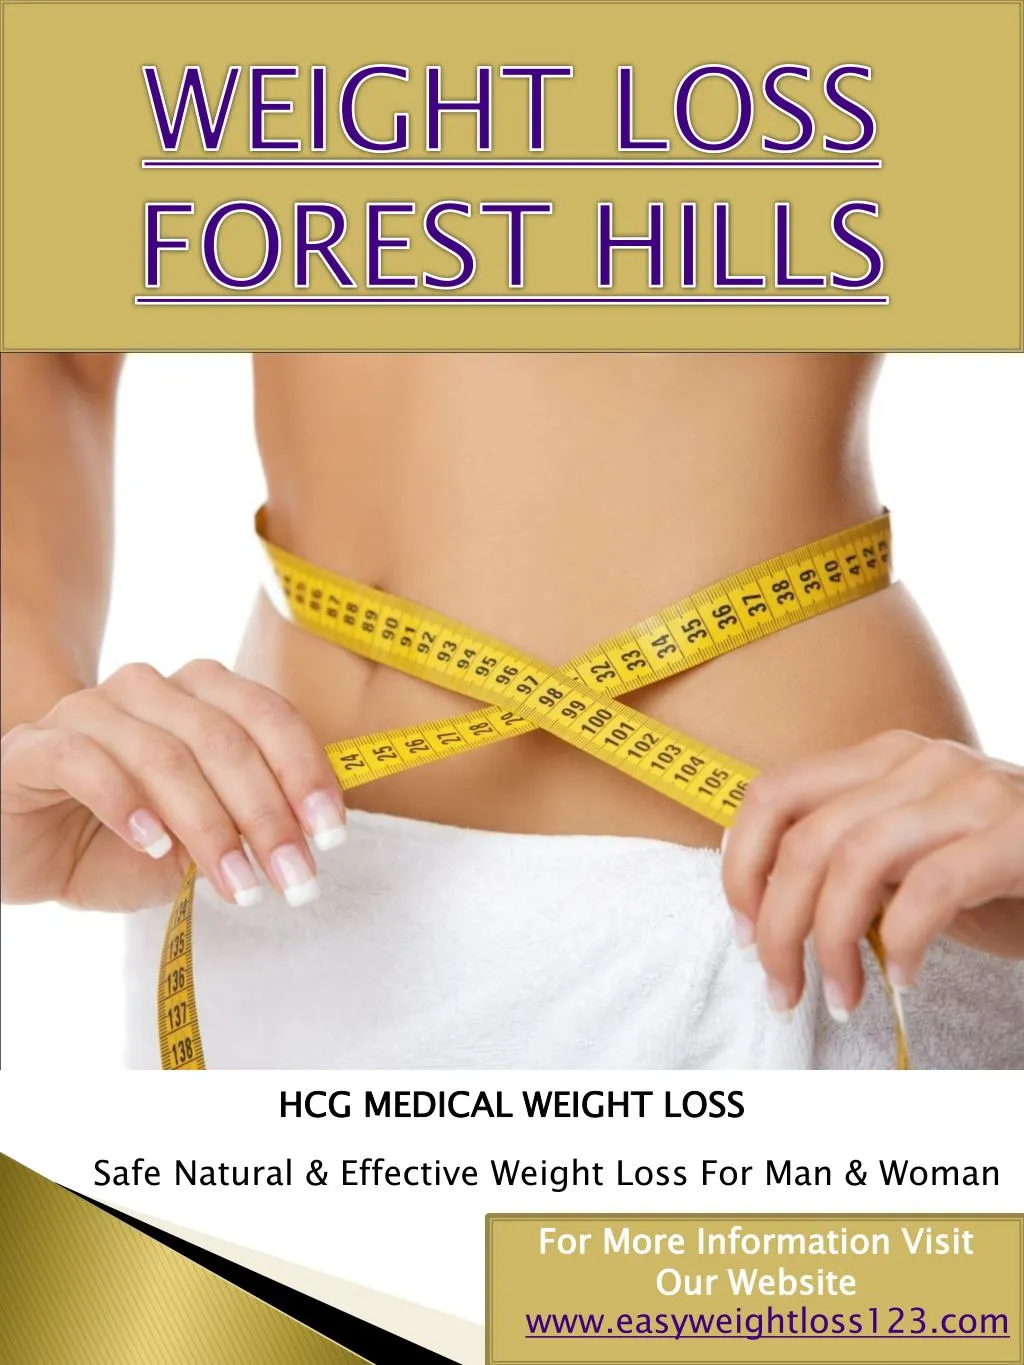 weight loss forest hills